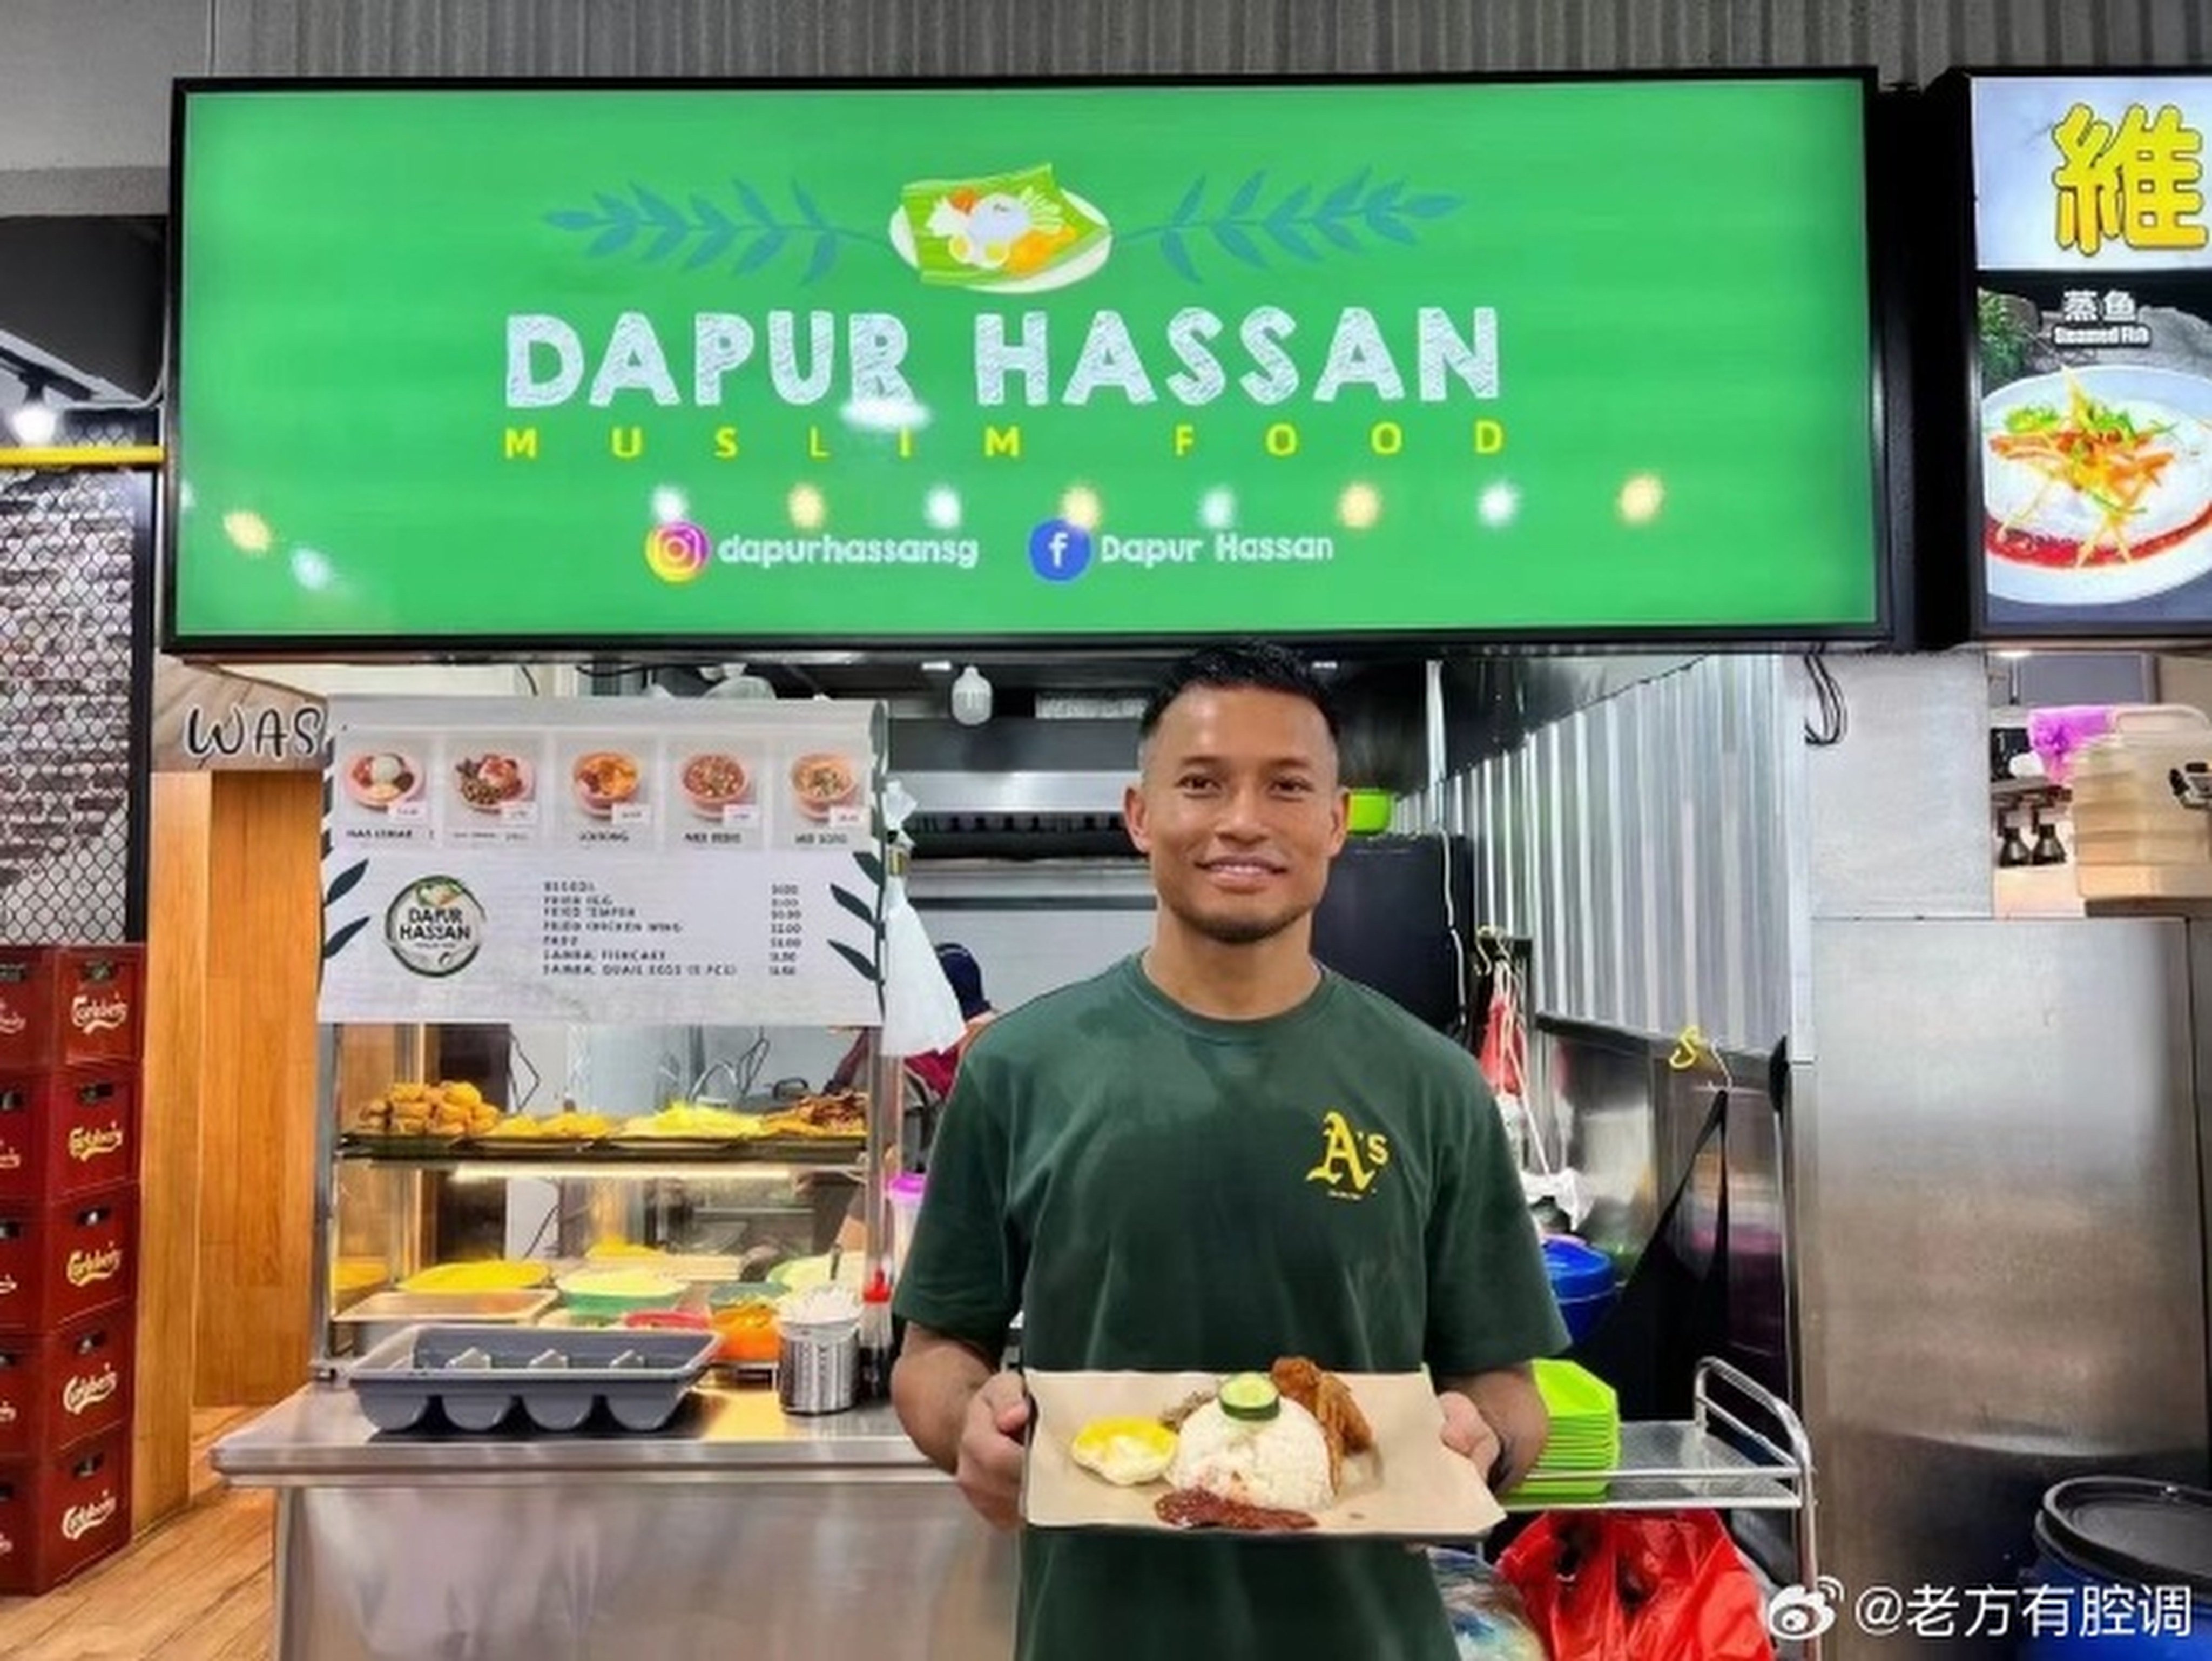 Singaporean goalie Hassan Sunny’s food stall has been packed with Chinese football fans the last couple of days. Photo: Weibo